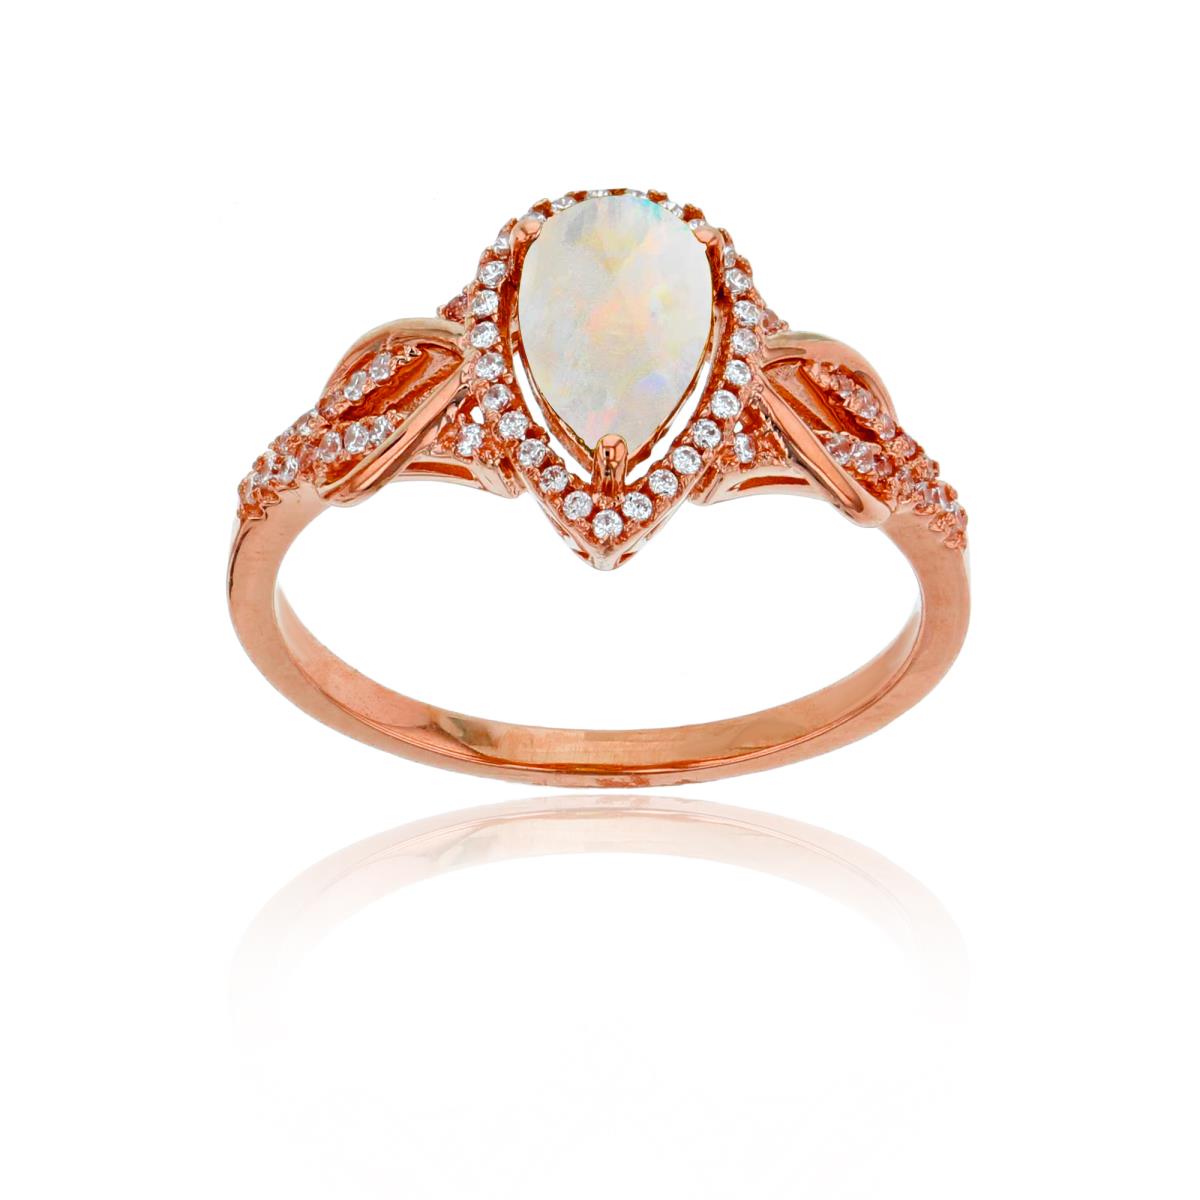 14K Rose Gold 0.17CTTW Rnd Diamond & 8x5mm Pear Cut Created Opal Knot Sides Ring